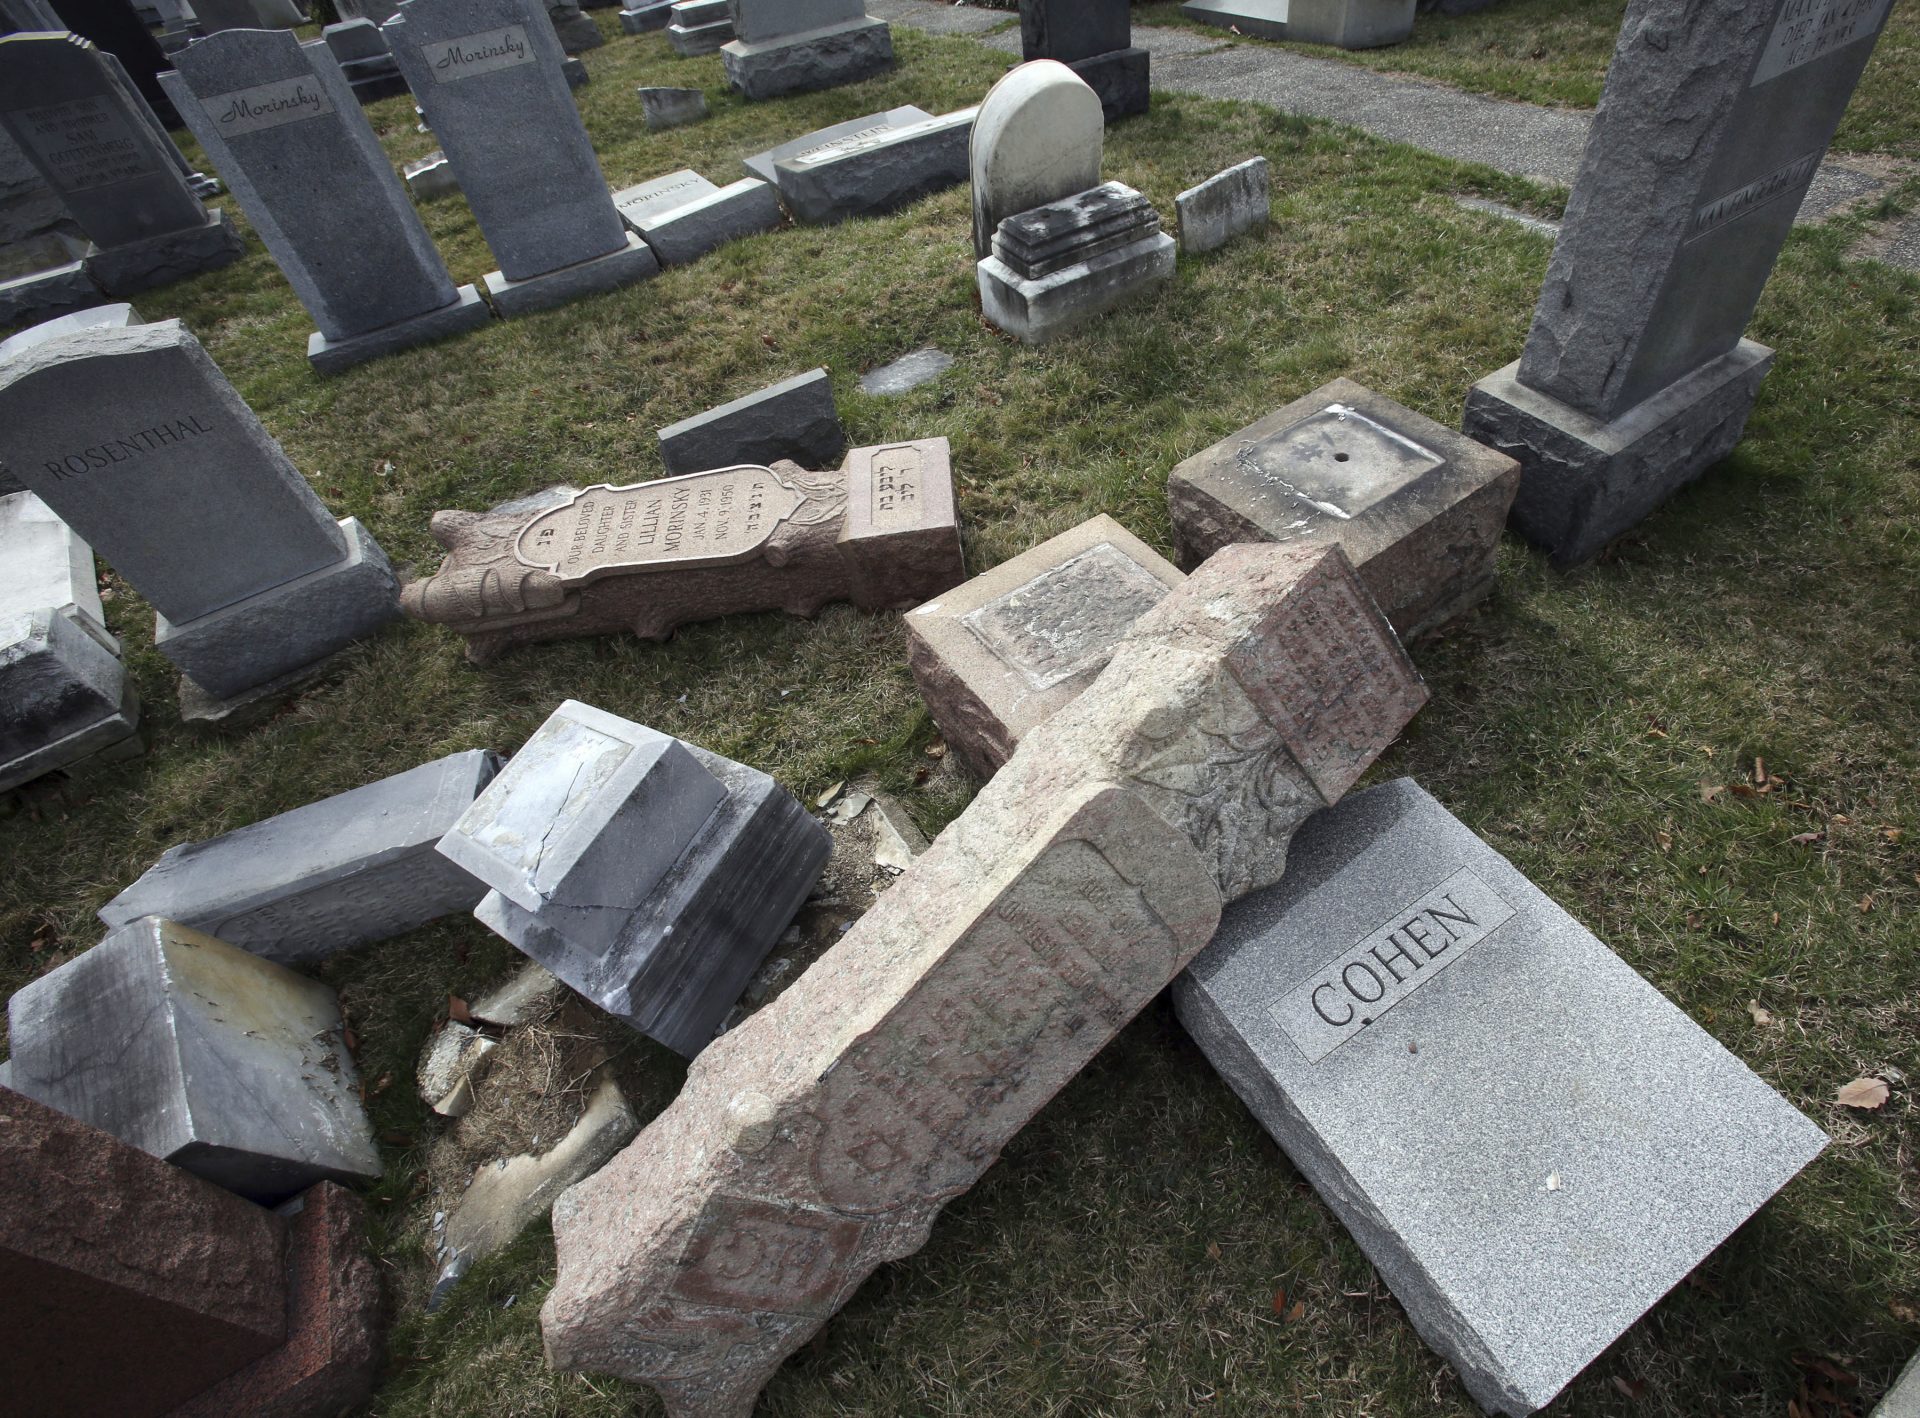 In this Feb. 27, 2017 file photo, headstones toppled and damaged by vandals lie on the ground at Mount Carmel Cemetery in Philadelphia. The Anti-Defamation League is reporting a 57 percent increase in anti-Semitic incidents in the U.S. in 2017, the highest tally that the Jewish civil rights group has counted in more than two decades, according to data it released on Tuesday, Feb. 27, 2018.